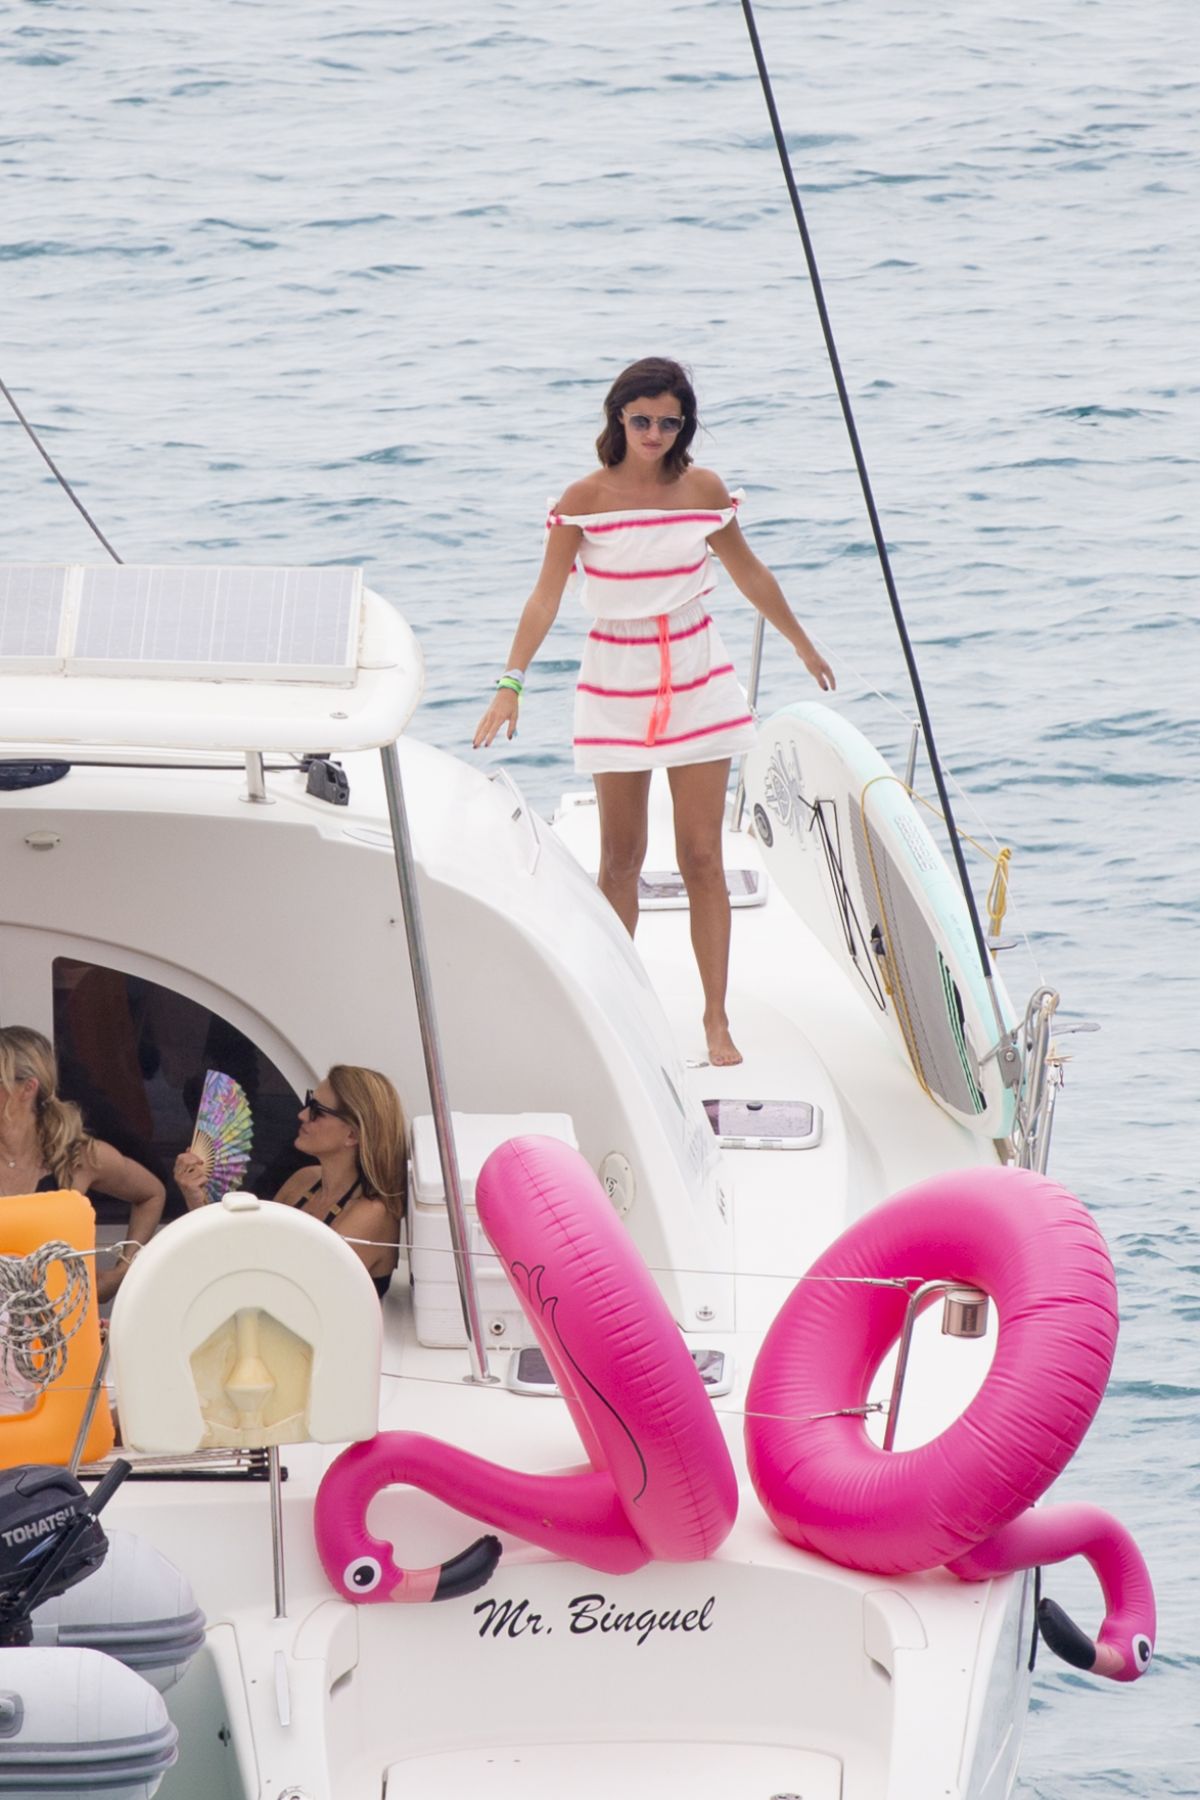 LUCY MECKLENBURGH at a Yacht in Ibiza 07/20/2017 – HawtCelebs